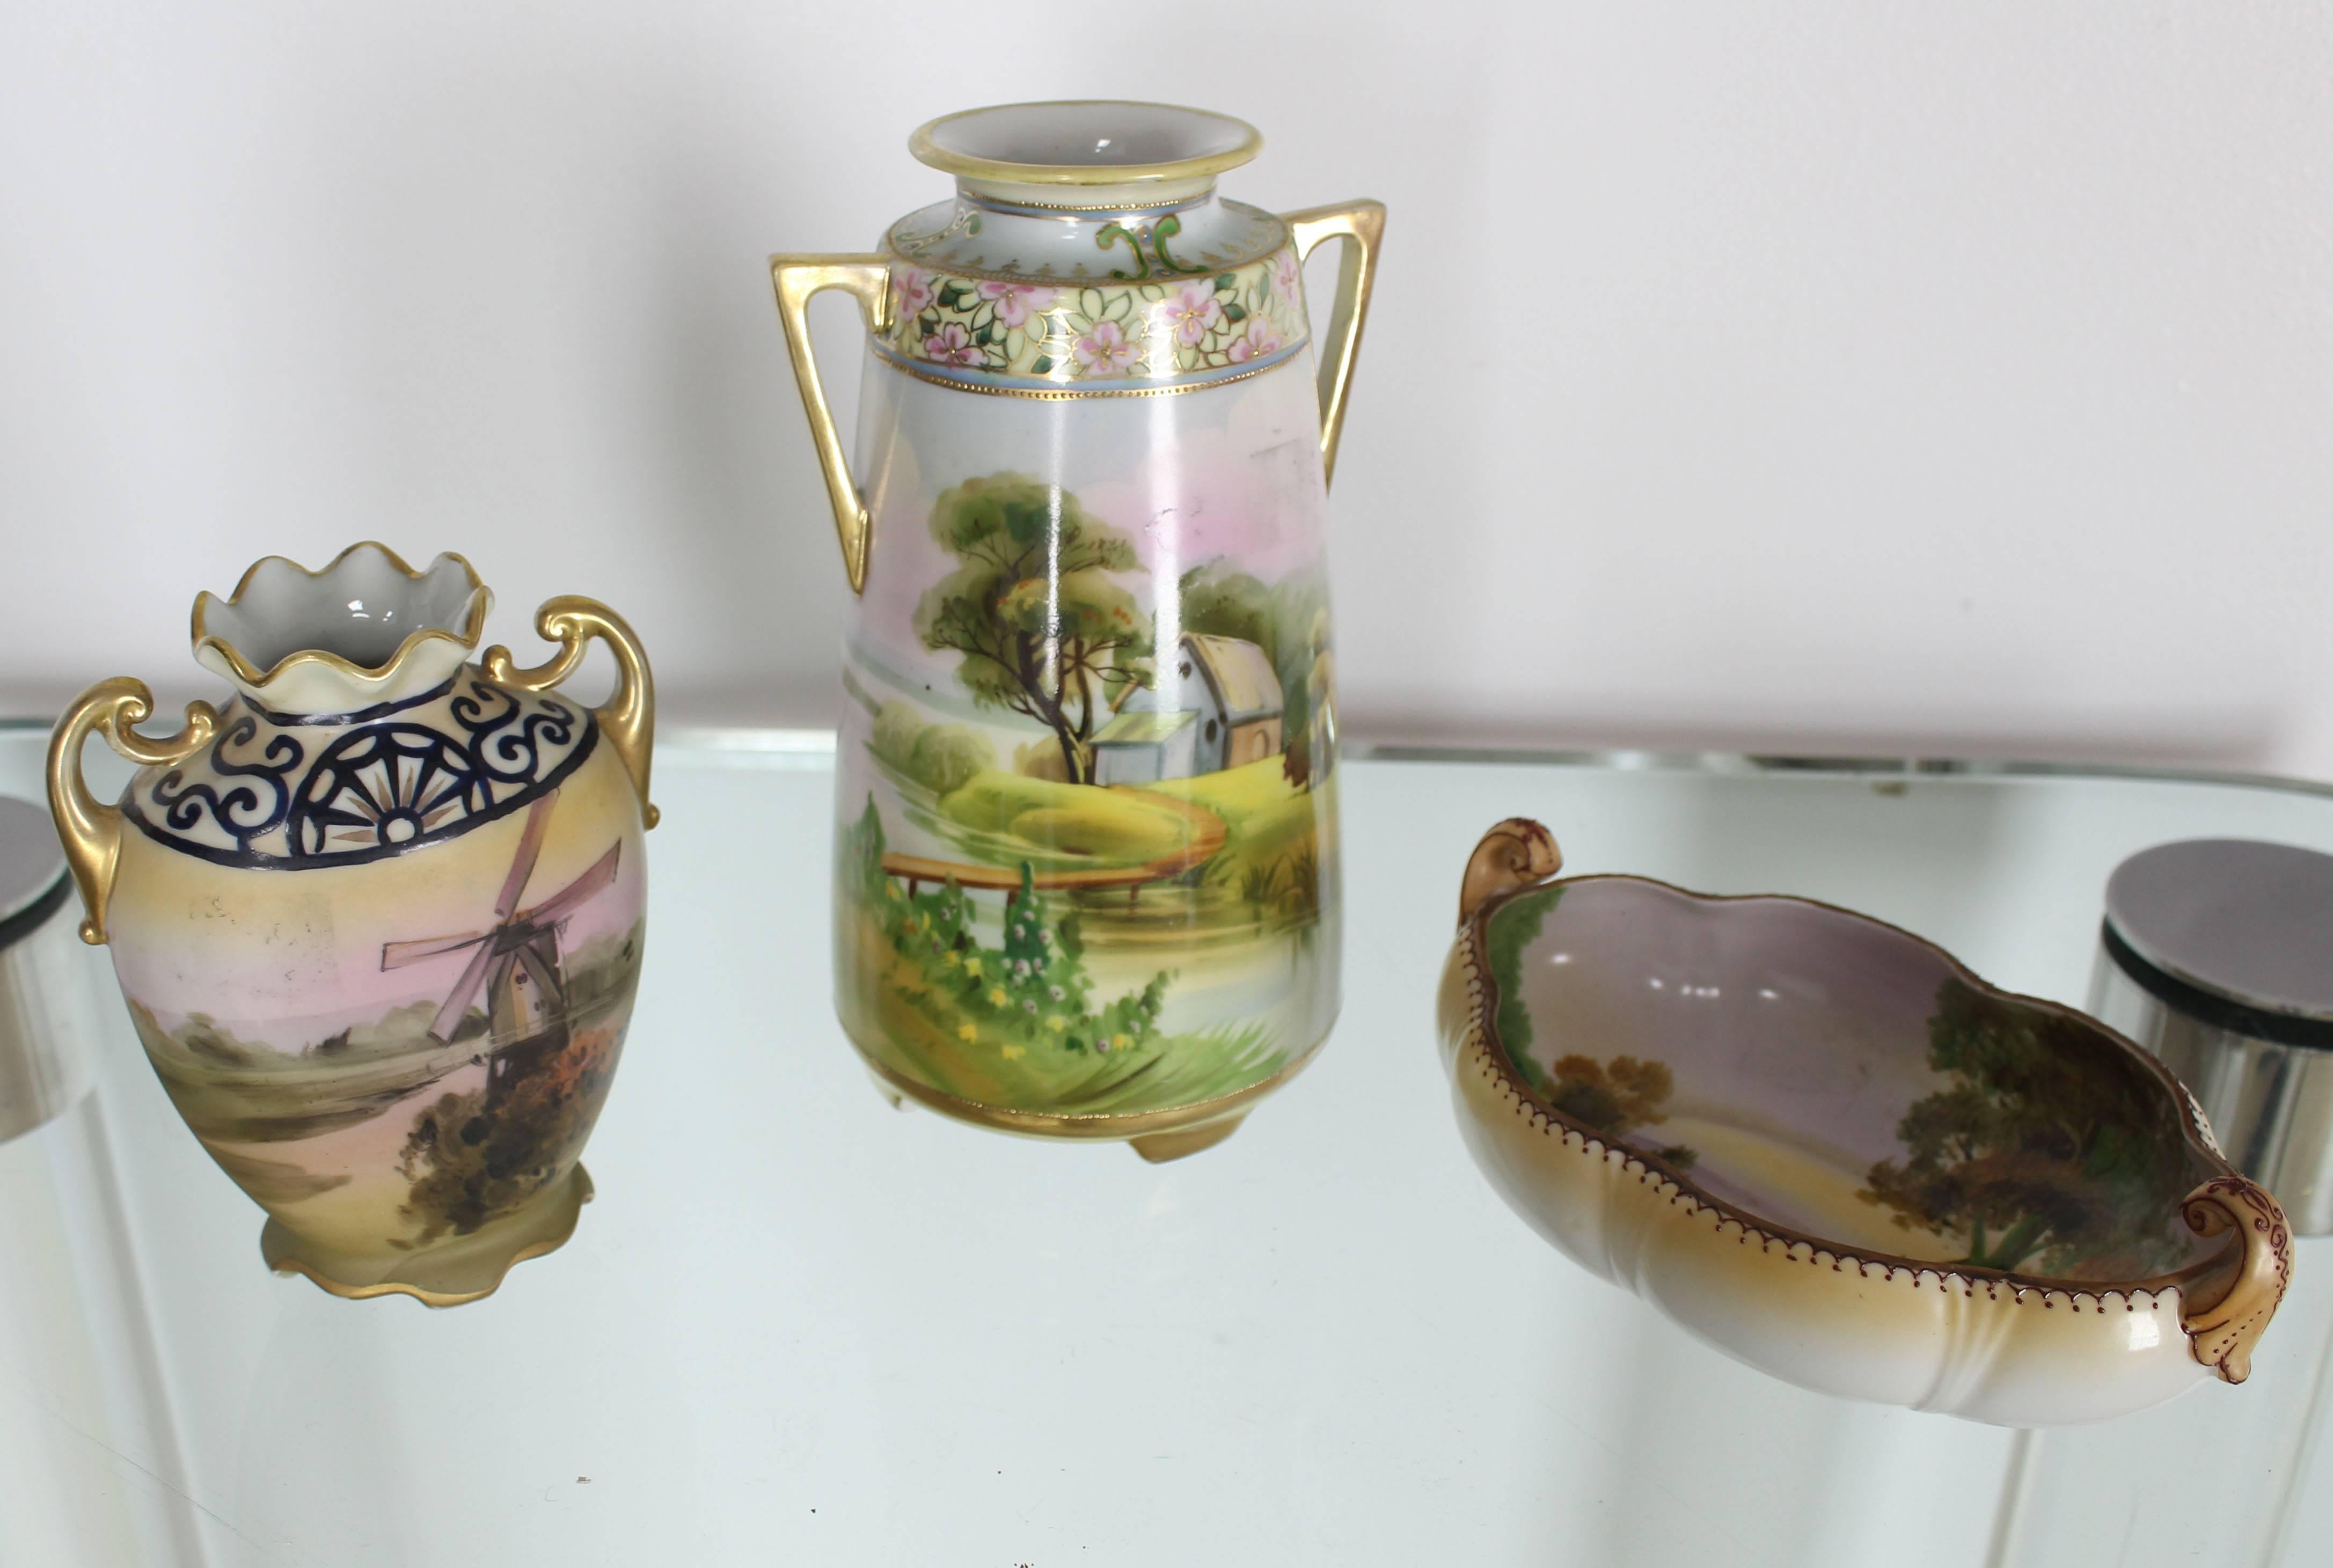 Nippon Hand-Painted Porcelain Vases and Bowl Three Pieces Porcelain Group